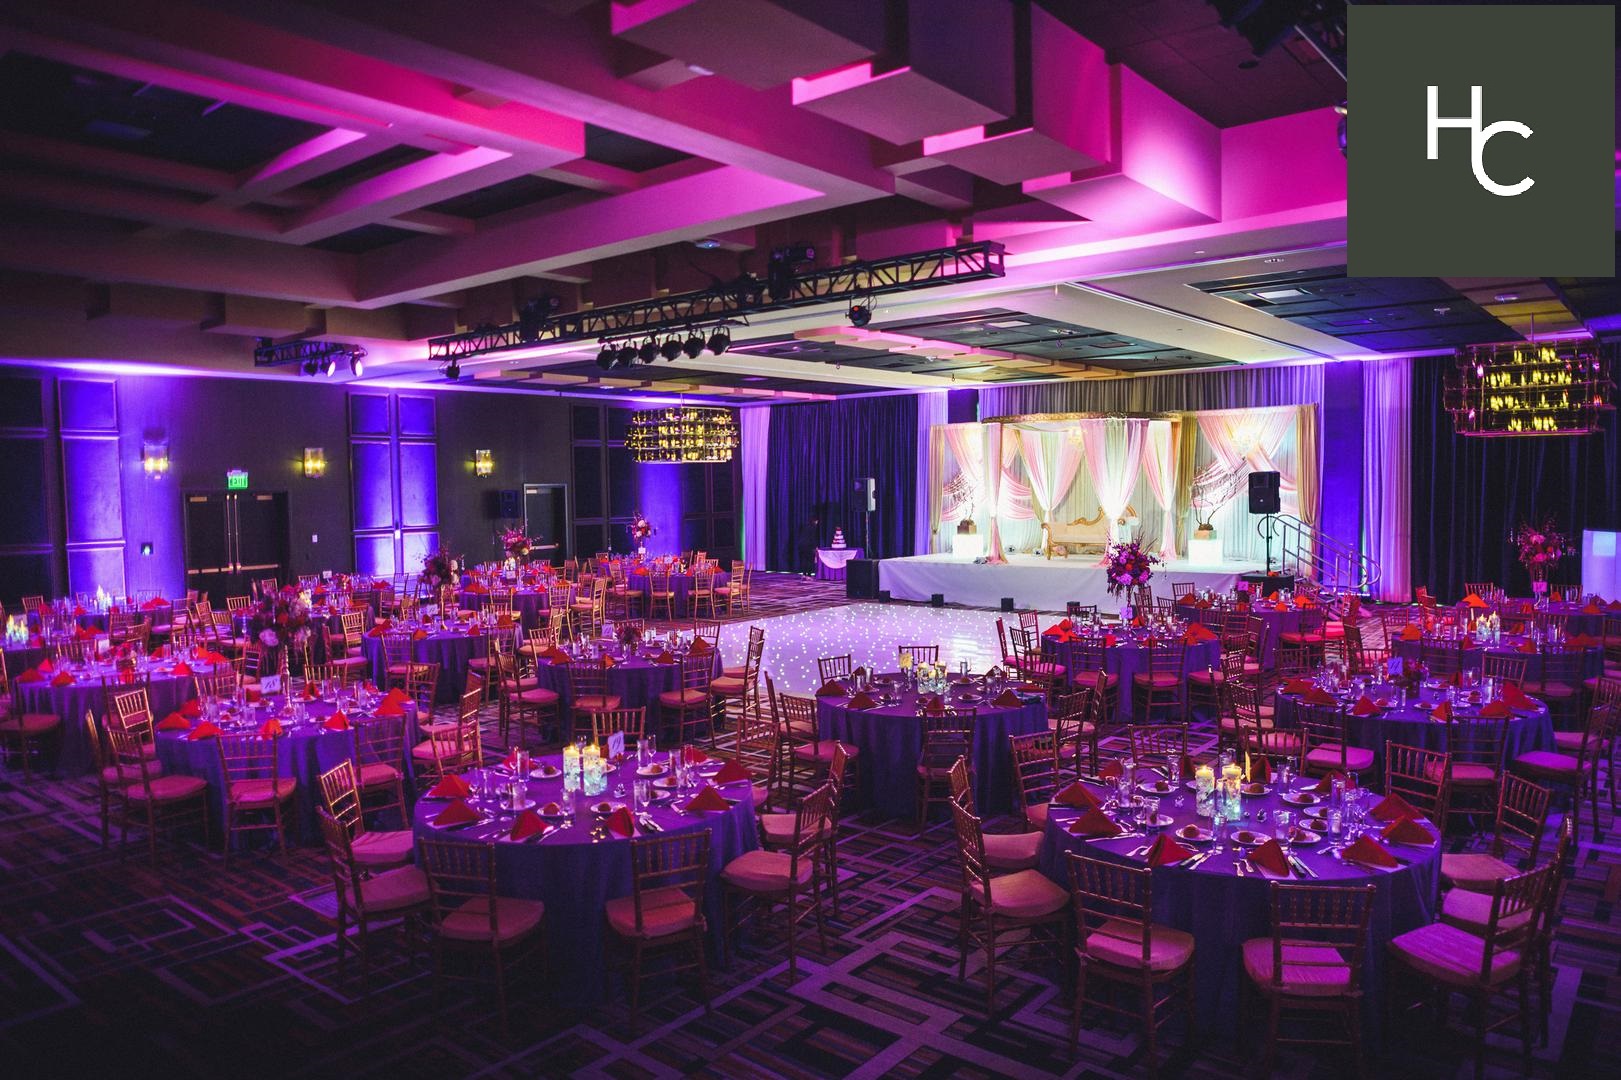 Creating The Perfect Ambiance For Your Function Space